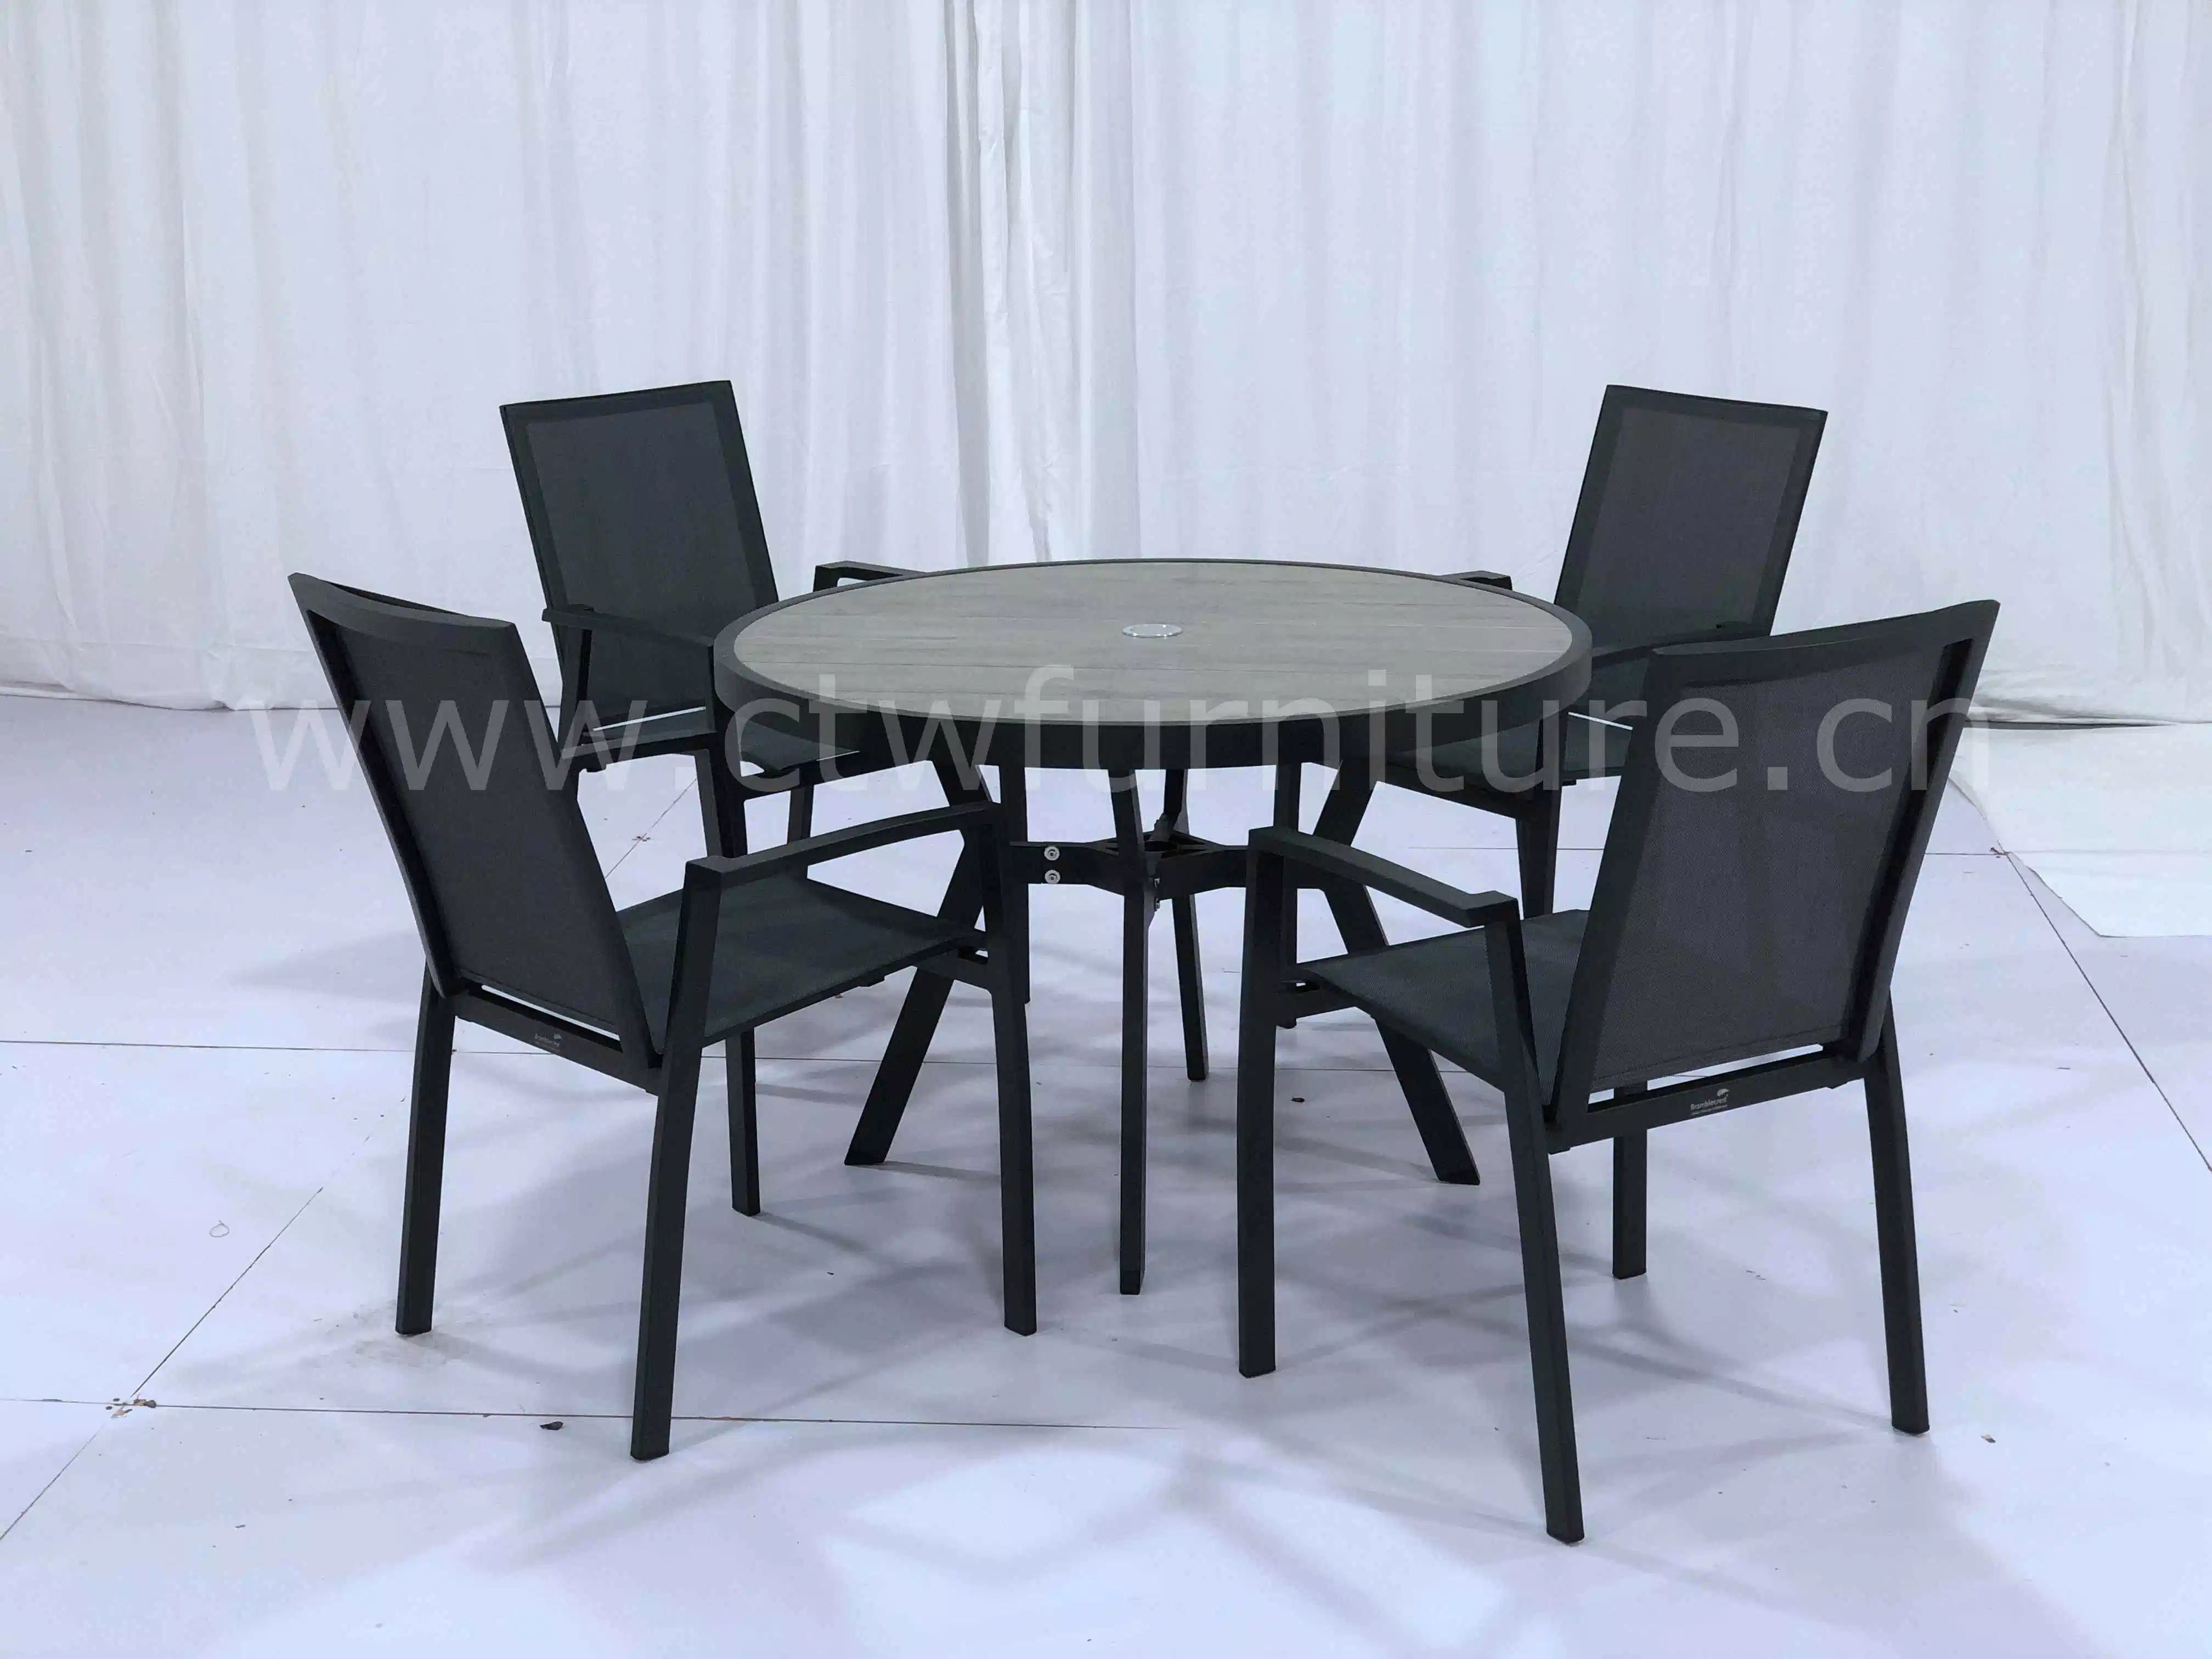 Restaurant Hotel Outdoor Garden Dinging Chair and Round Table Furniture